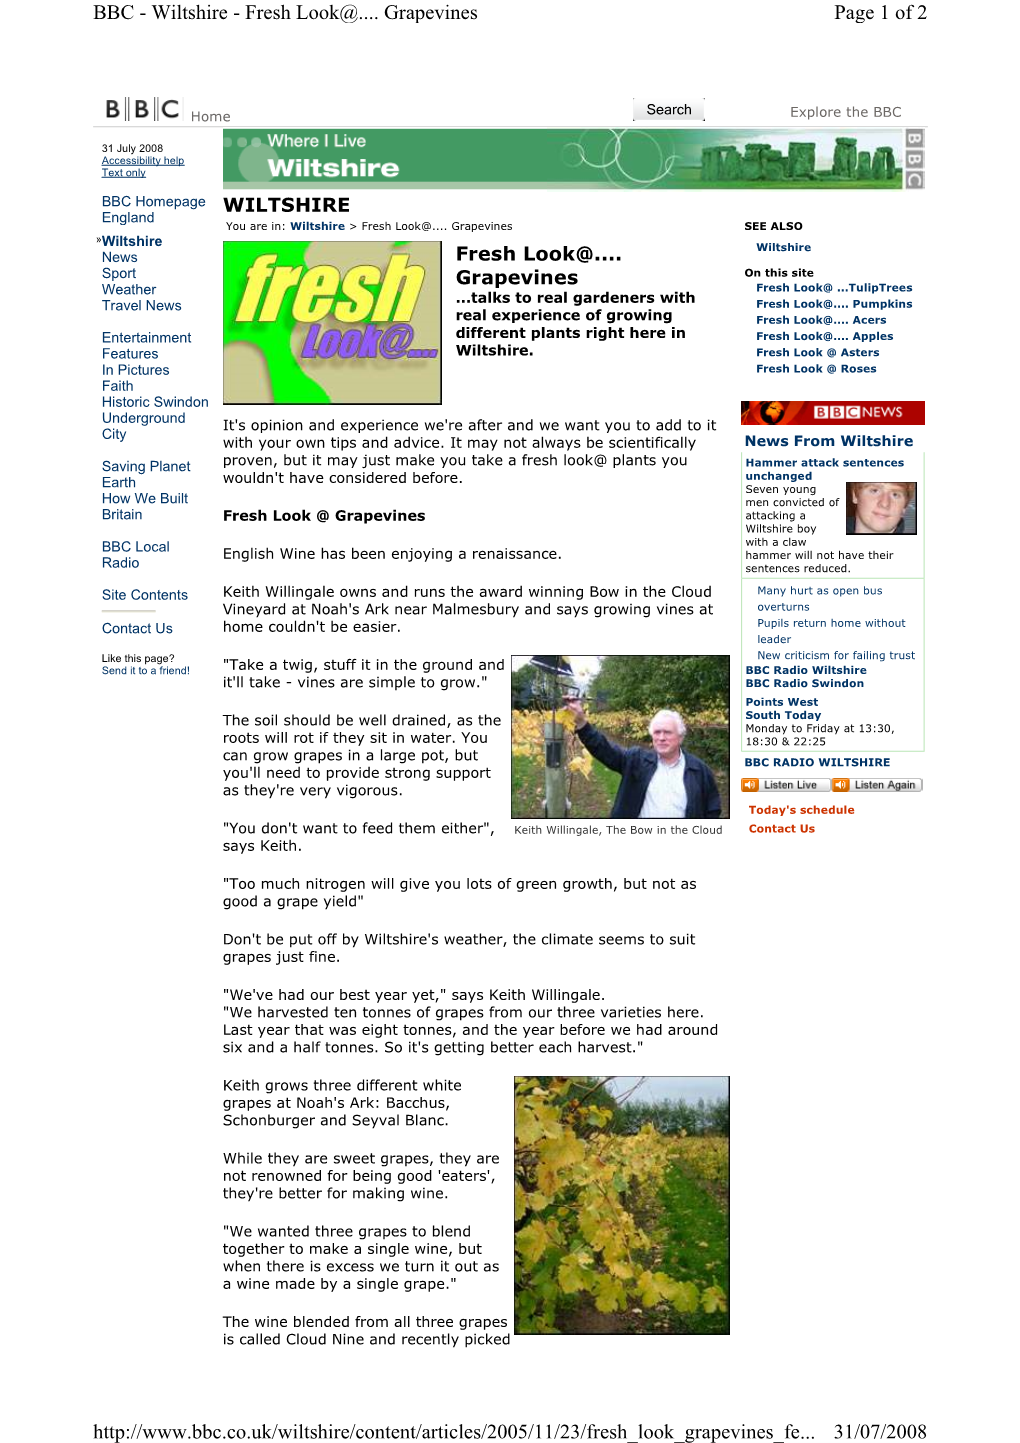 Keith Willingale Article on Vineyard